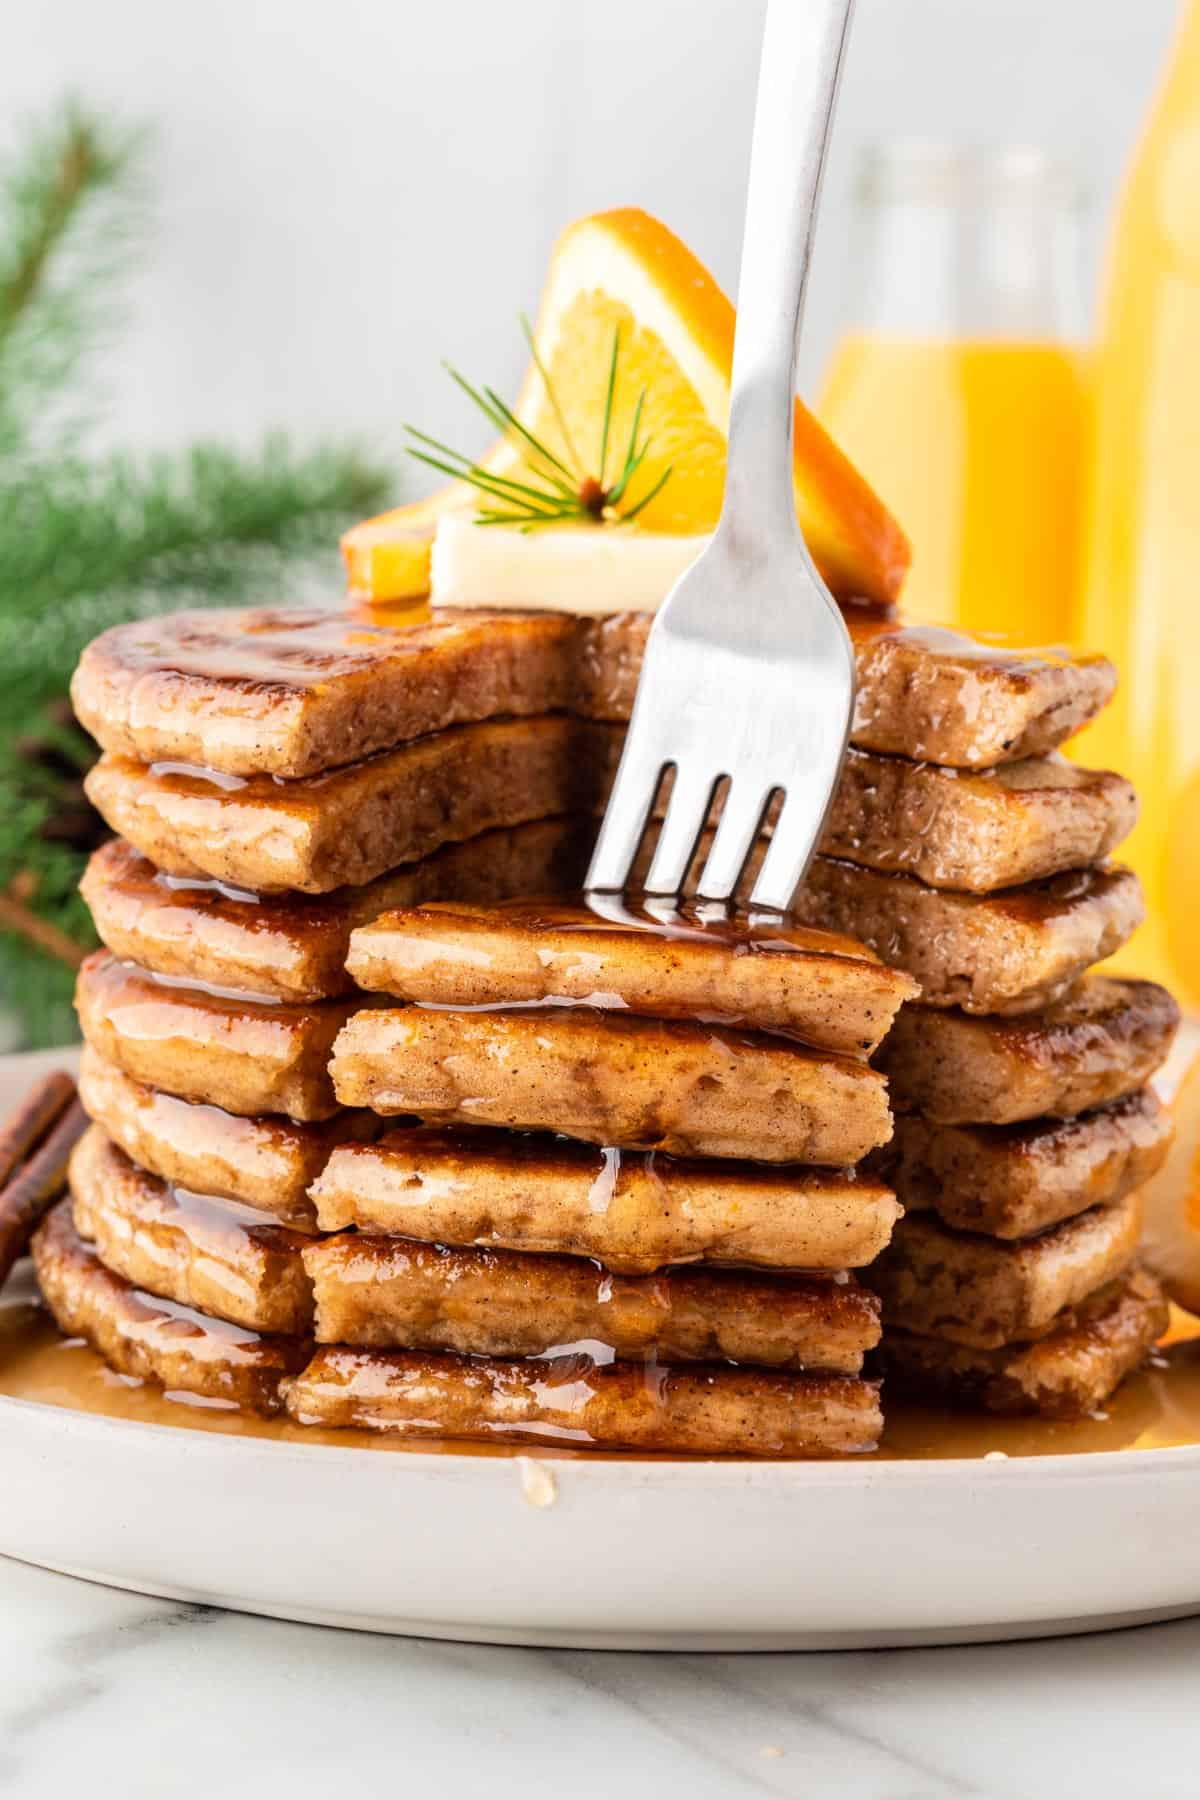 A photo of a fork picking up a bite from a stack of orange pancakes.